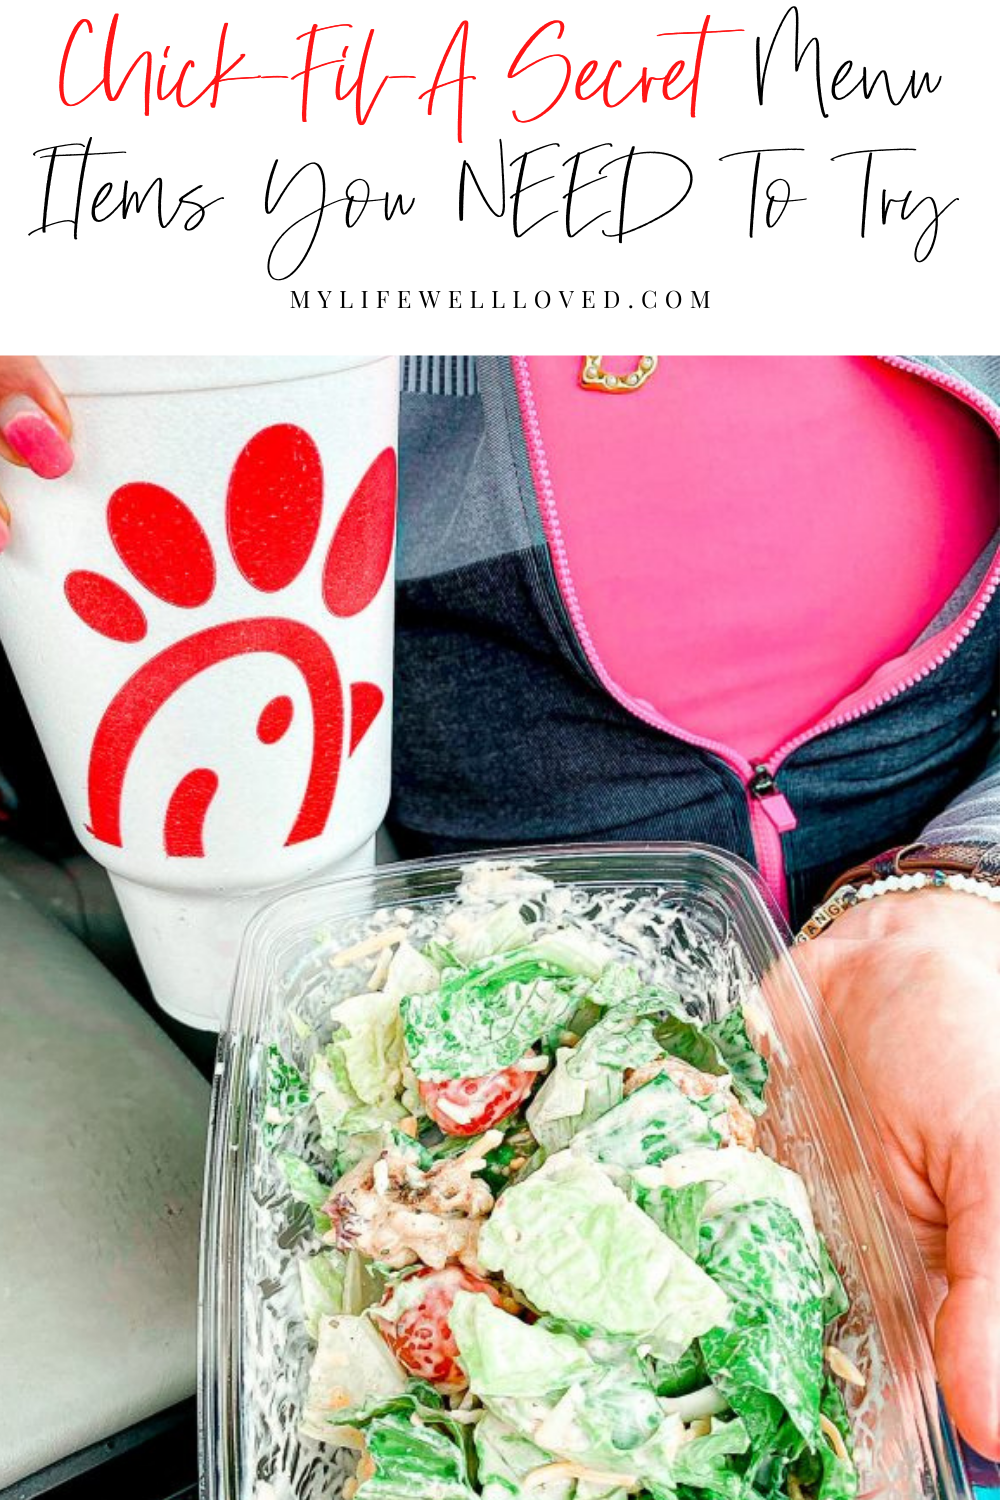 4 Healthy Chick-fil-A Low Carb Dinners by Alabama Food + Healthy Lifestyle blogger, My Life Well Loved.